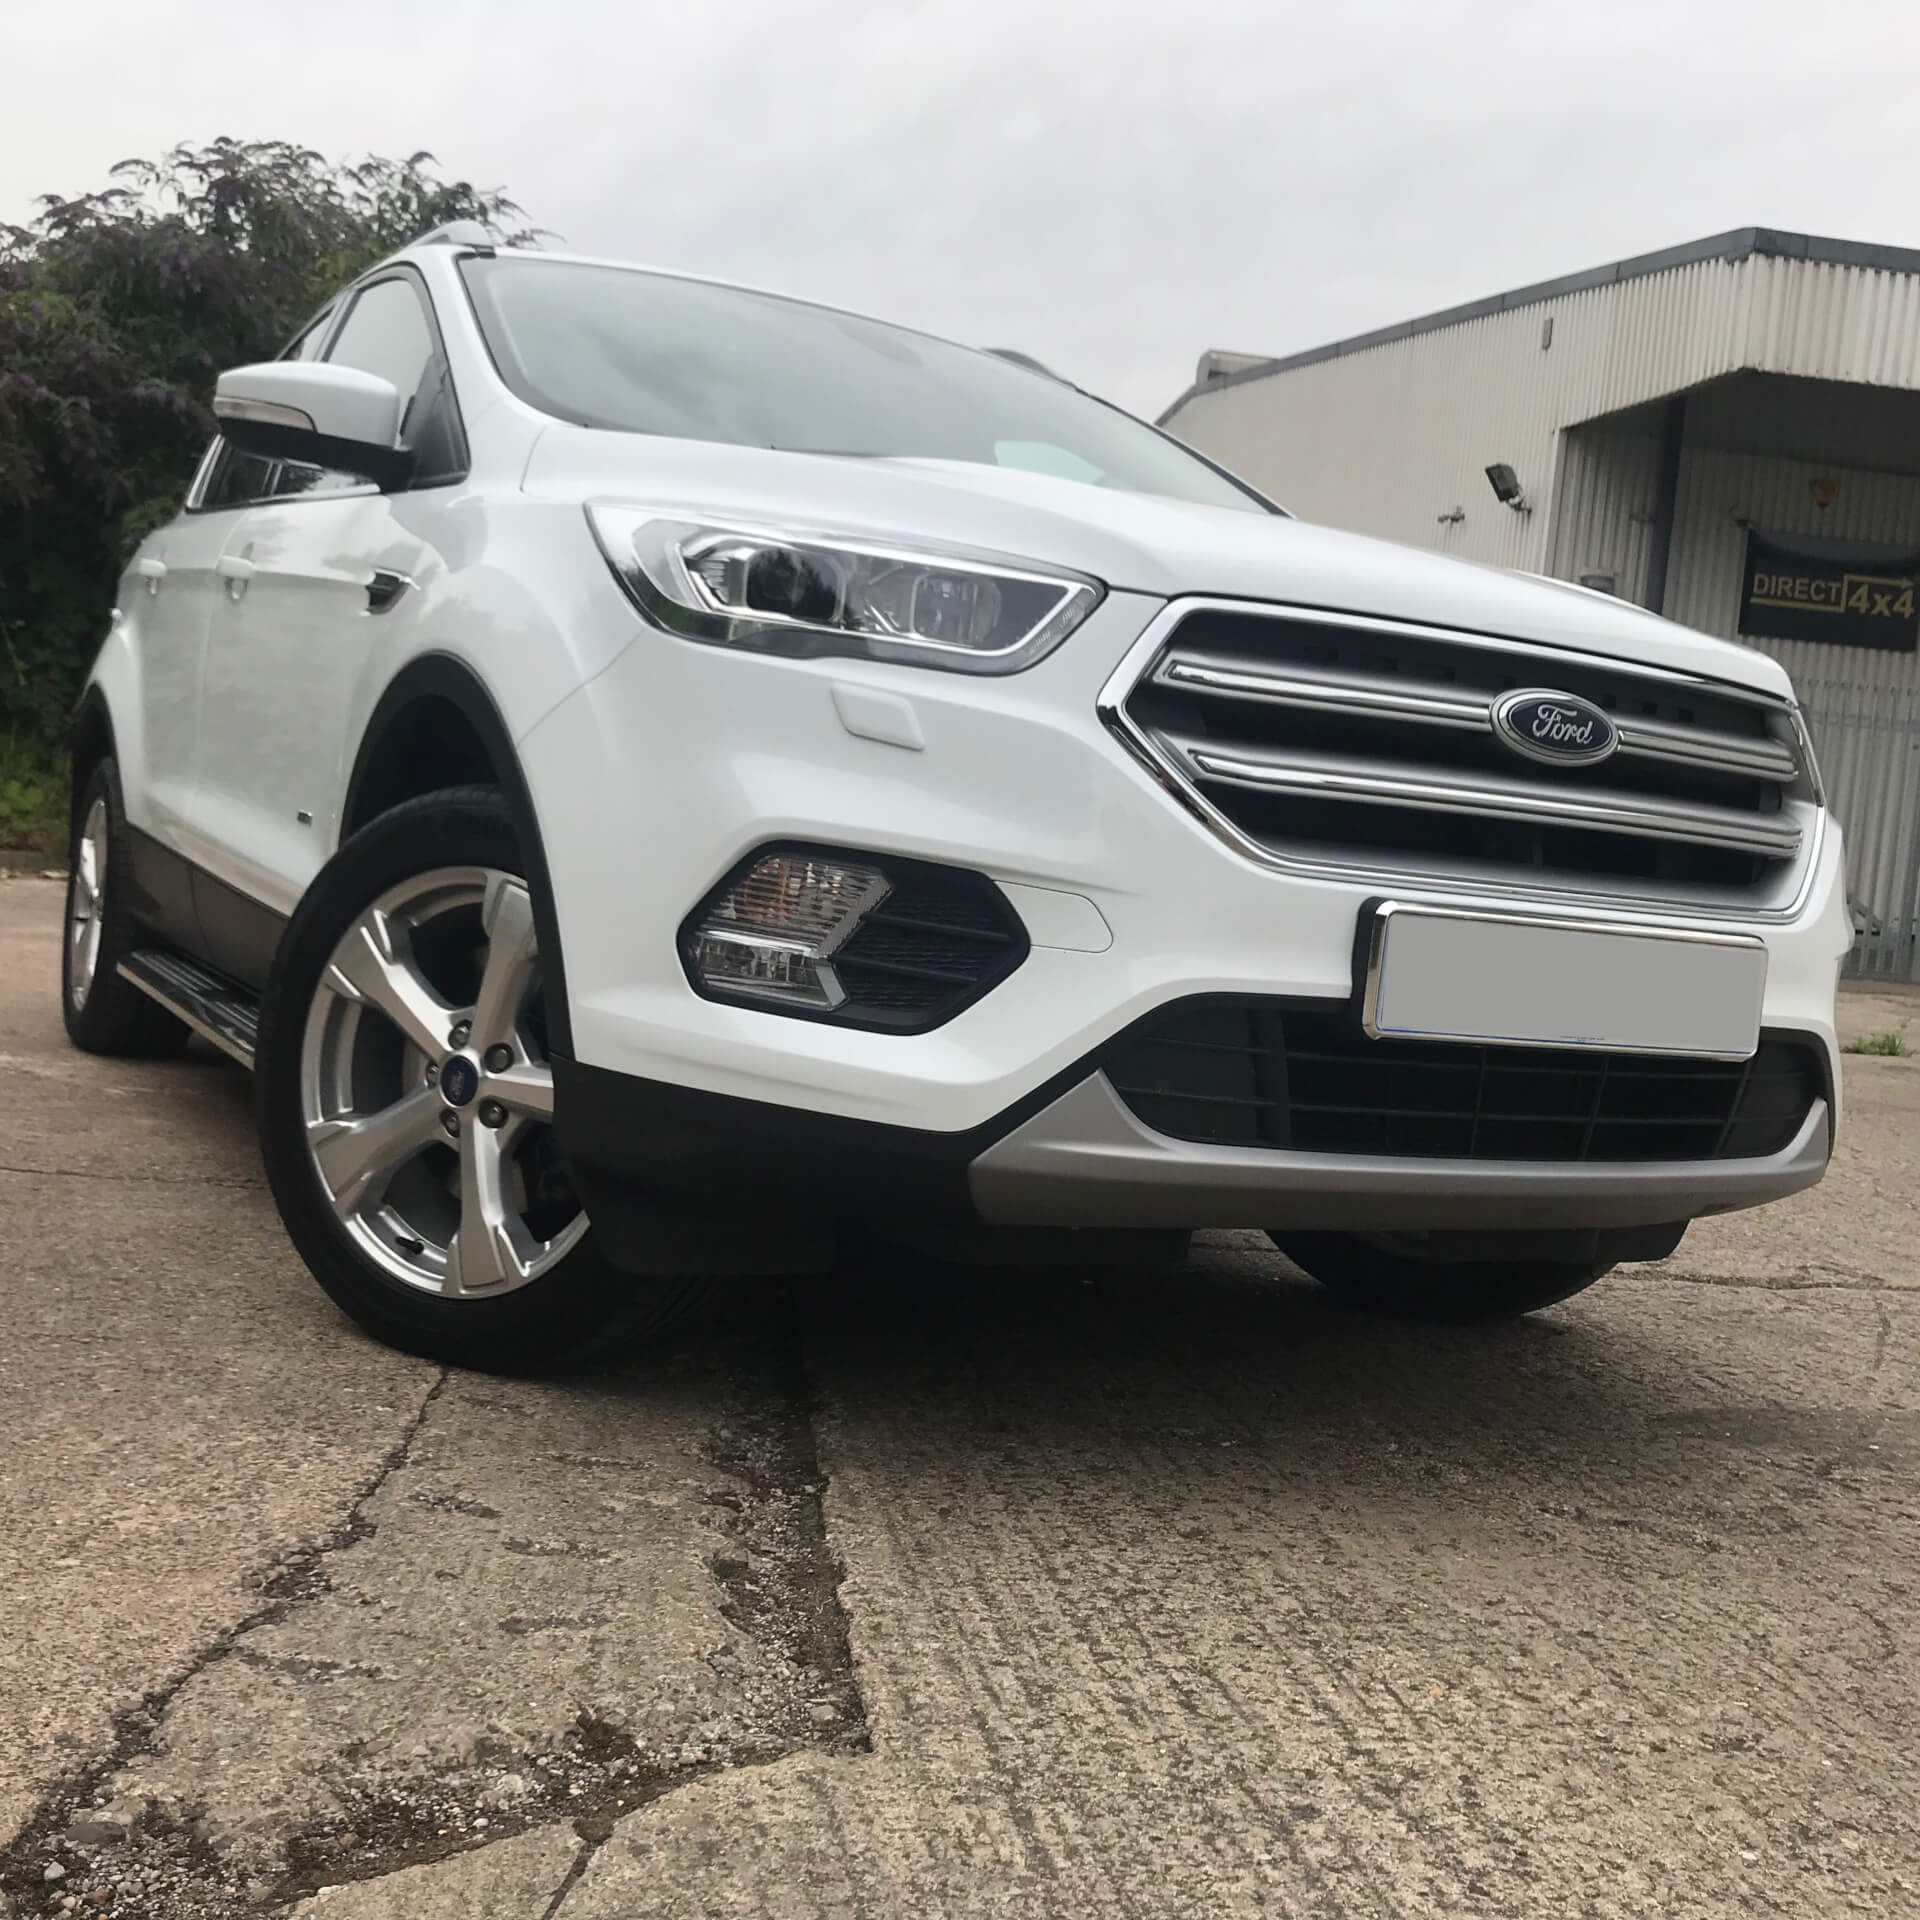 Direct4x4 accessories for Ford Kuga vehicles with a photo of a white Ford Kuga fitted with our premier side steps outside our offices